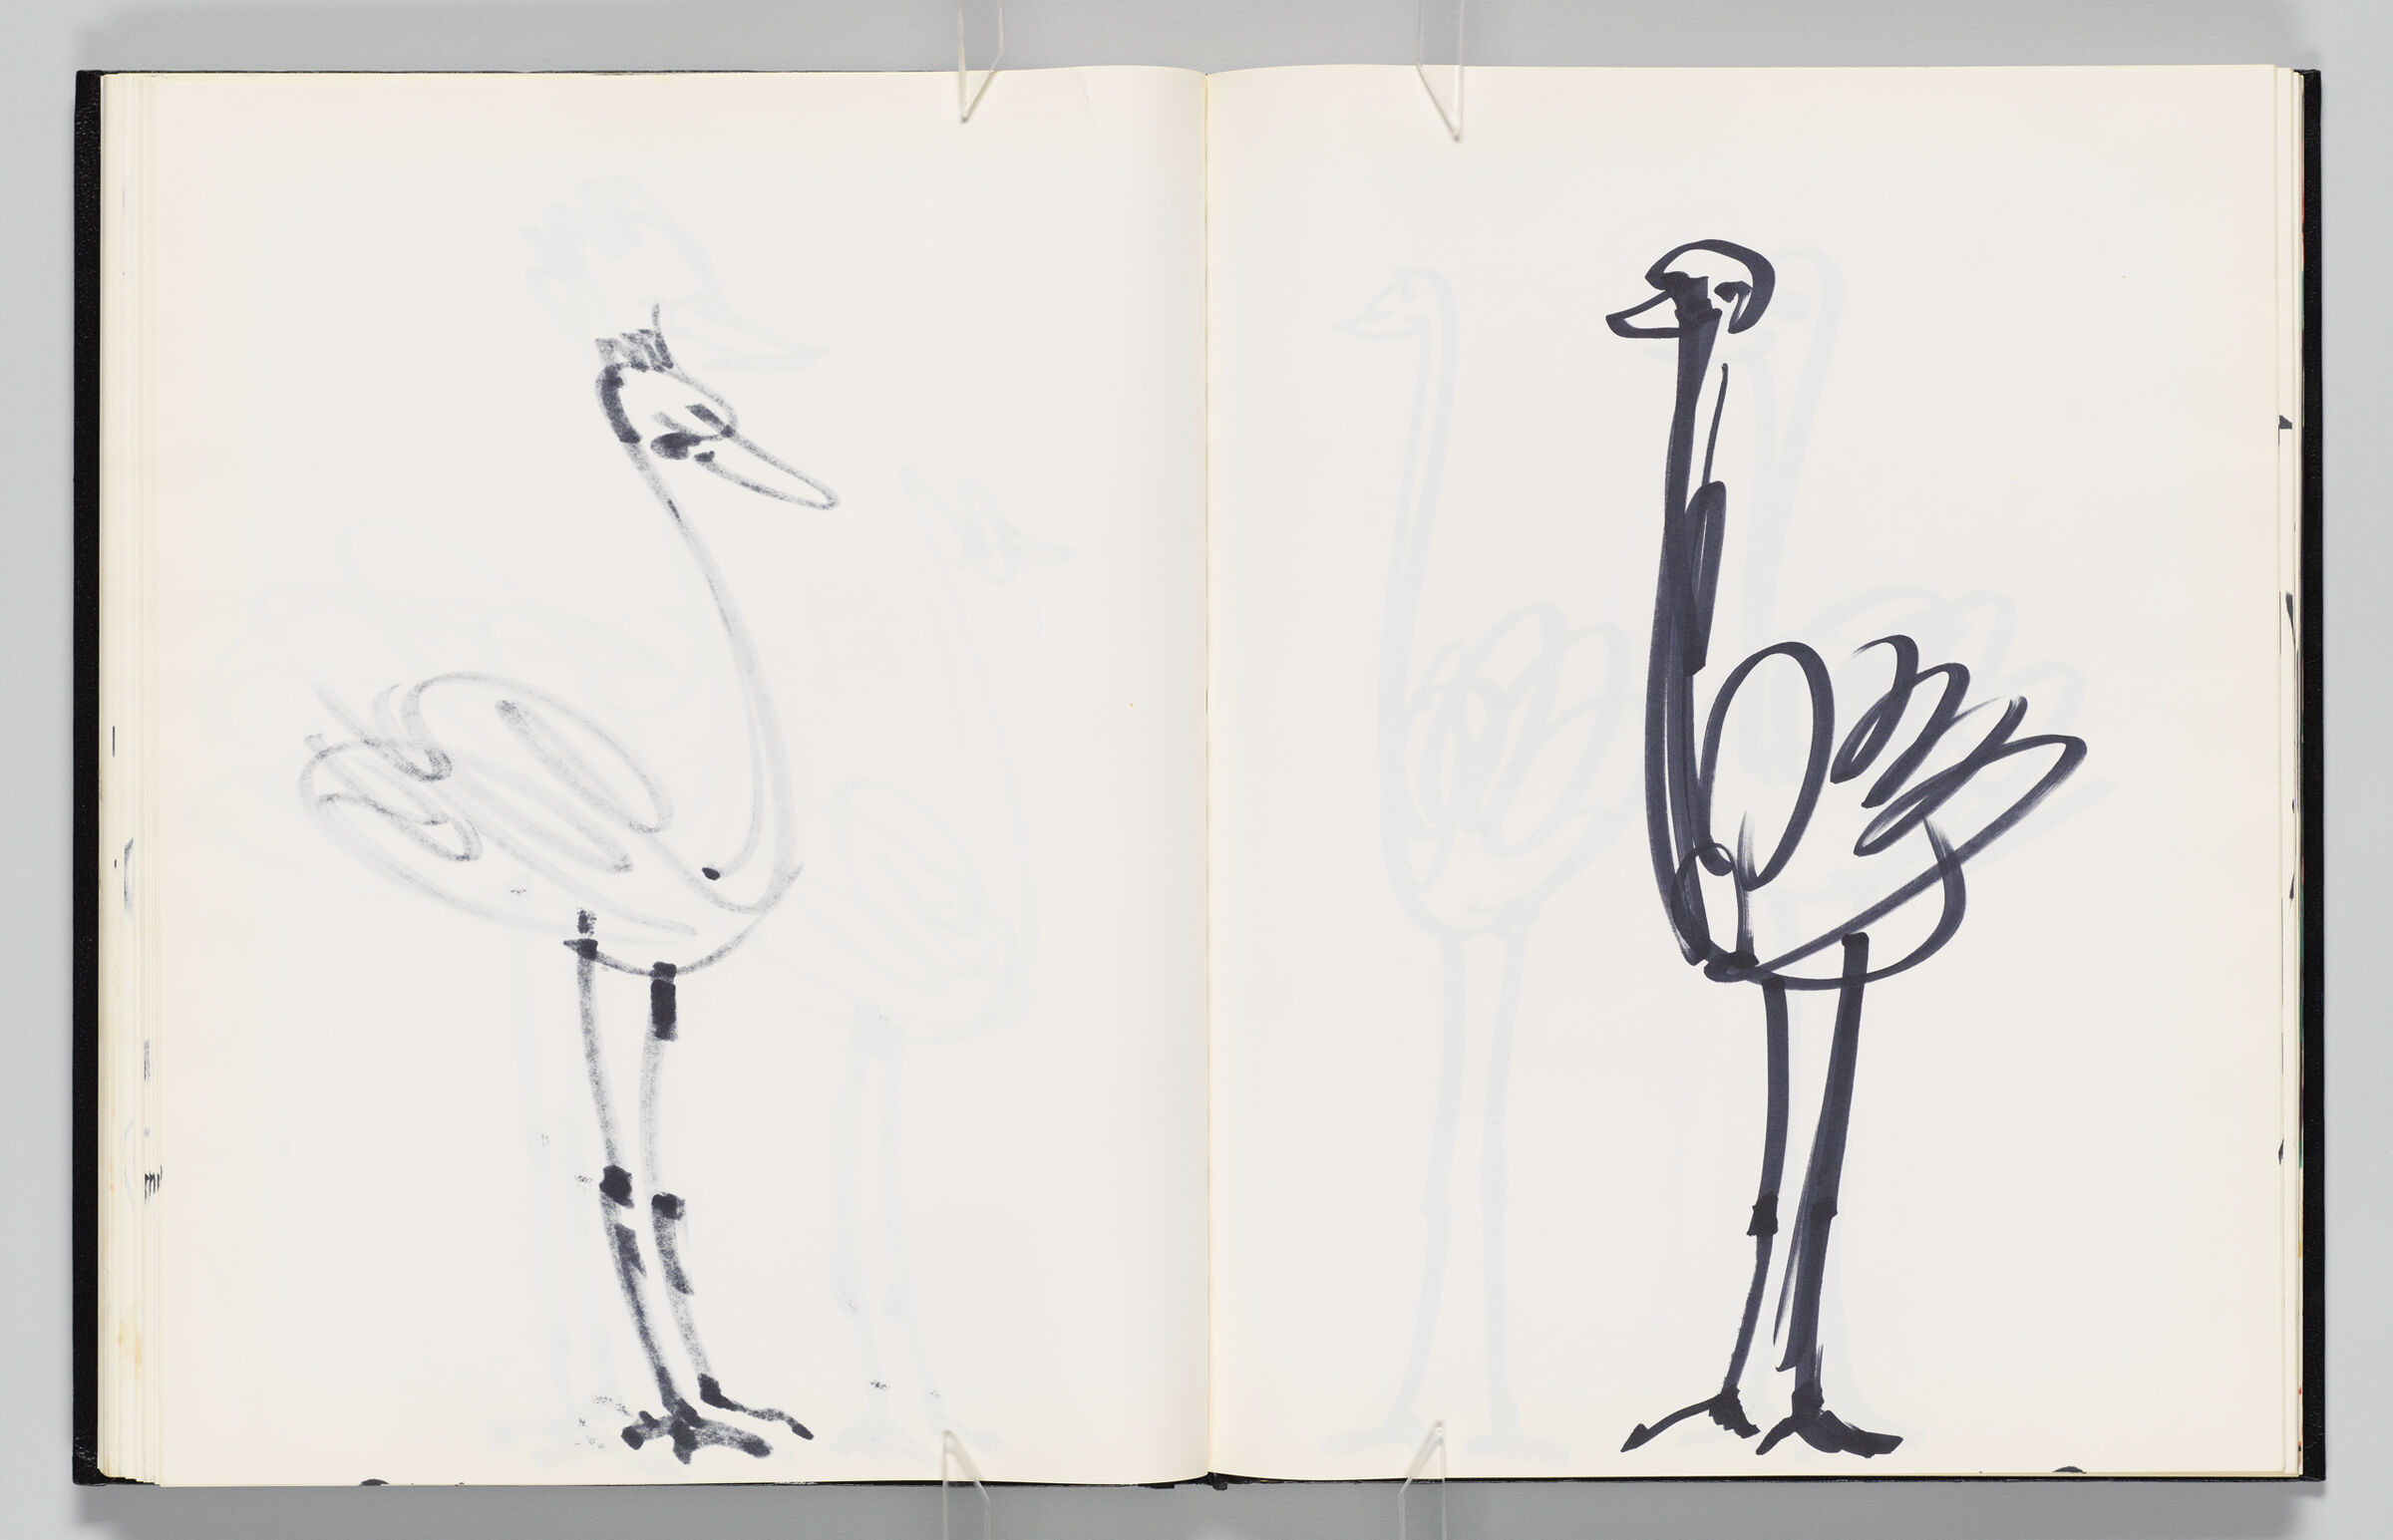 Untitled (Bleed-Through Of Previous Page, Left Page); Untitled (Ostrich, Right Page)